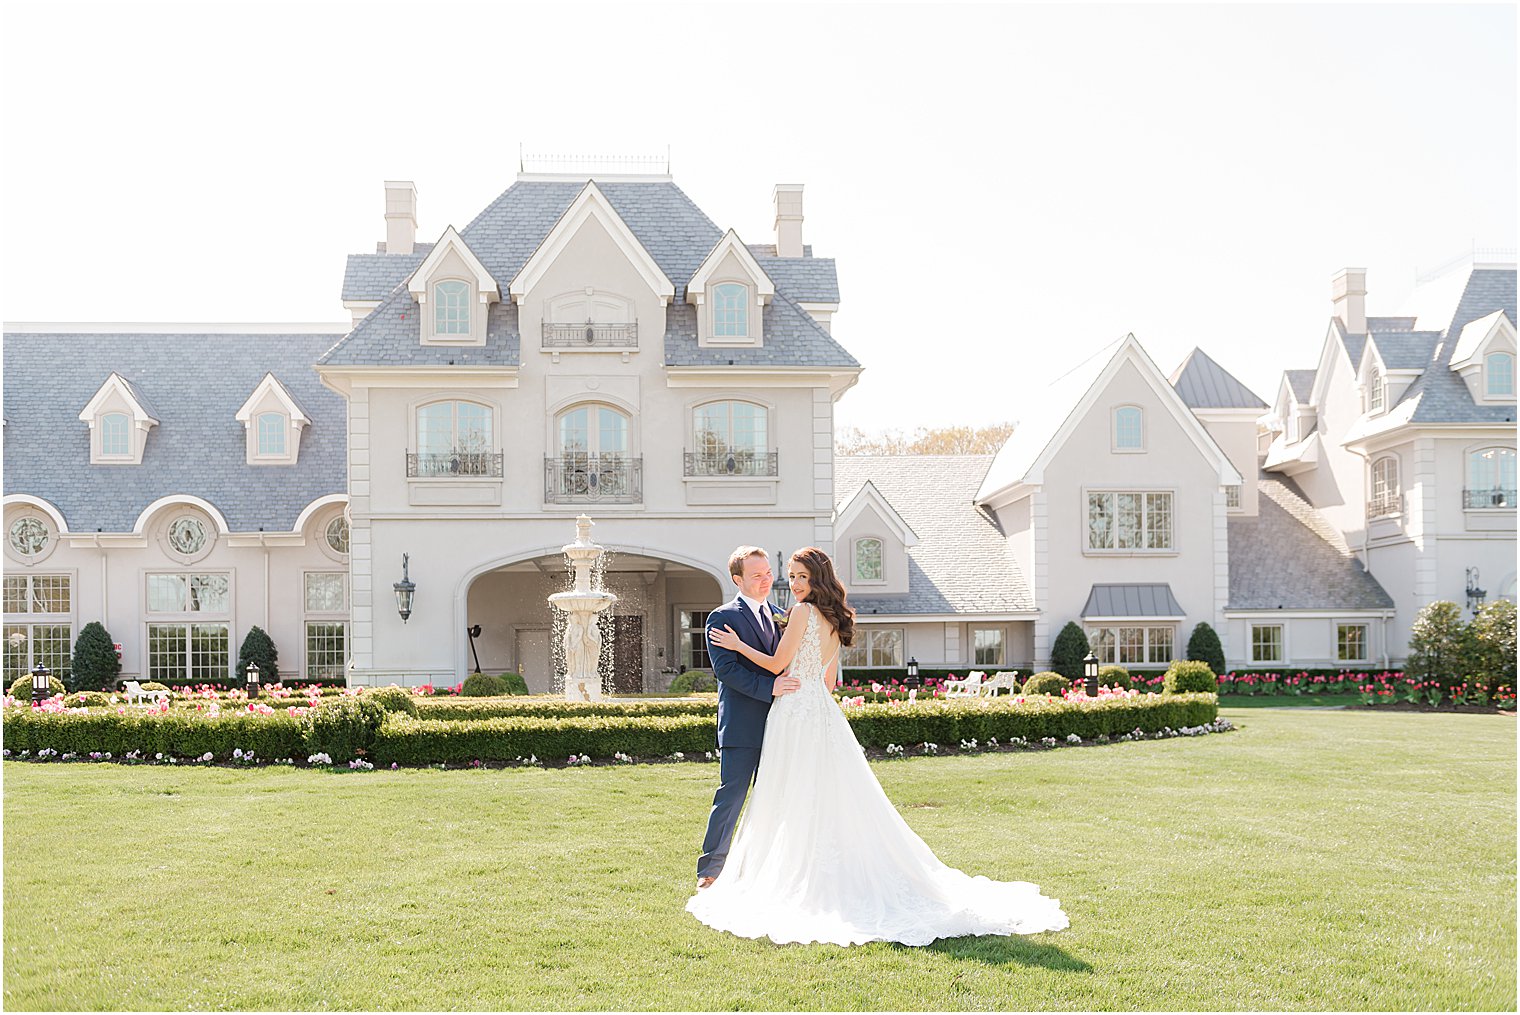 newlyweds kiss on lawn in front of estate house at Park Chateau Estate and Gardens